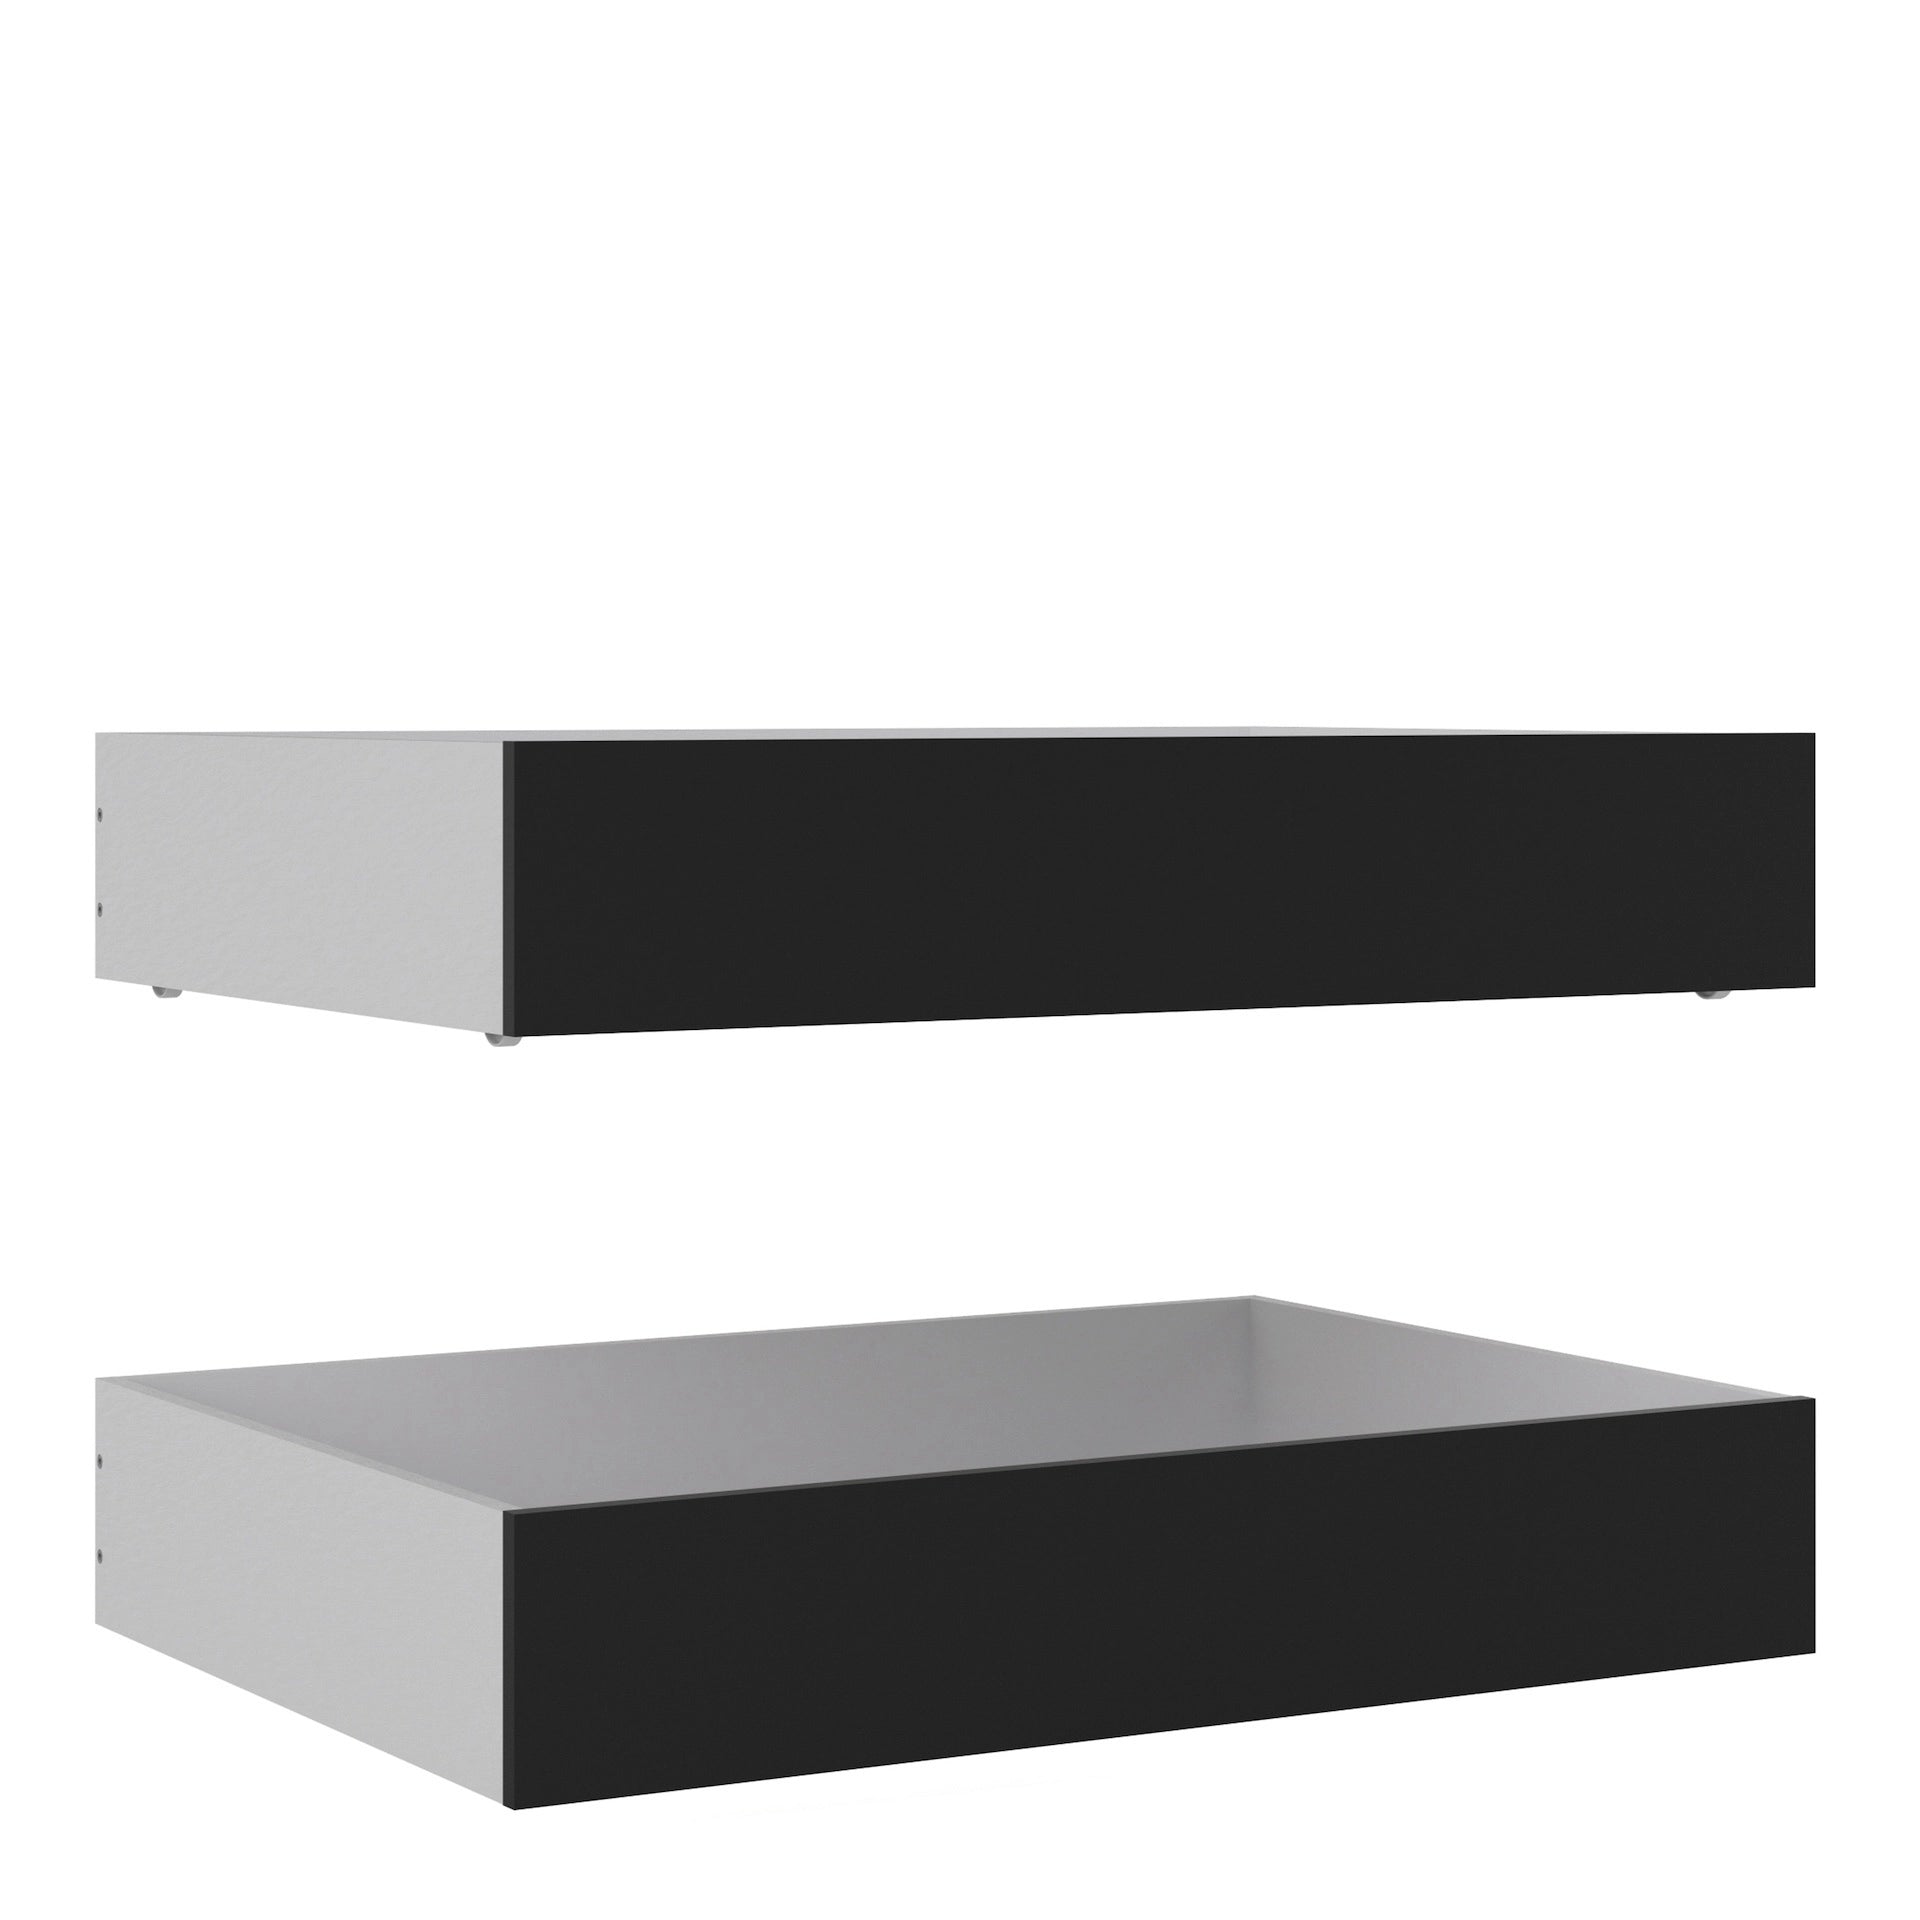 Furniture To Go Naia Set of 2 Underbed Drawers (For Single Or Double Beds) in Black Matt